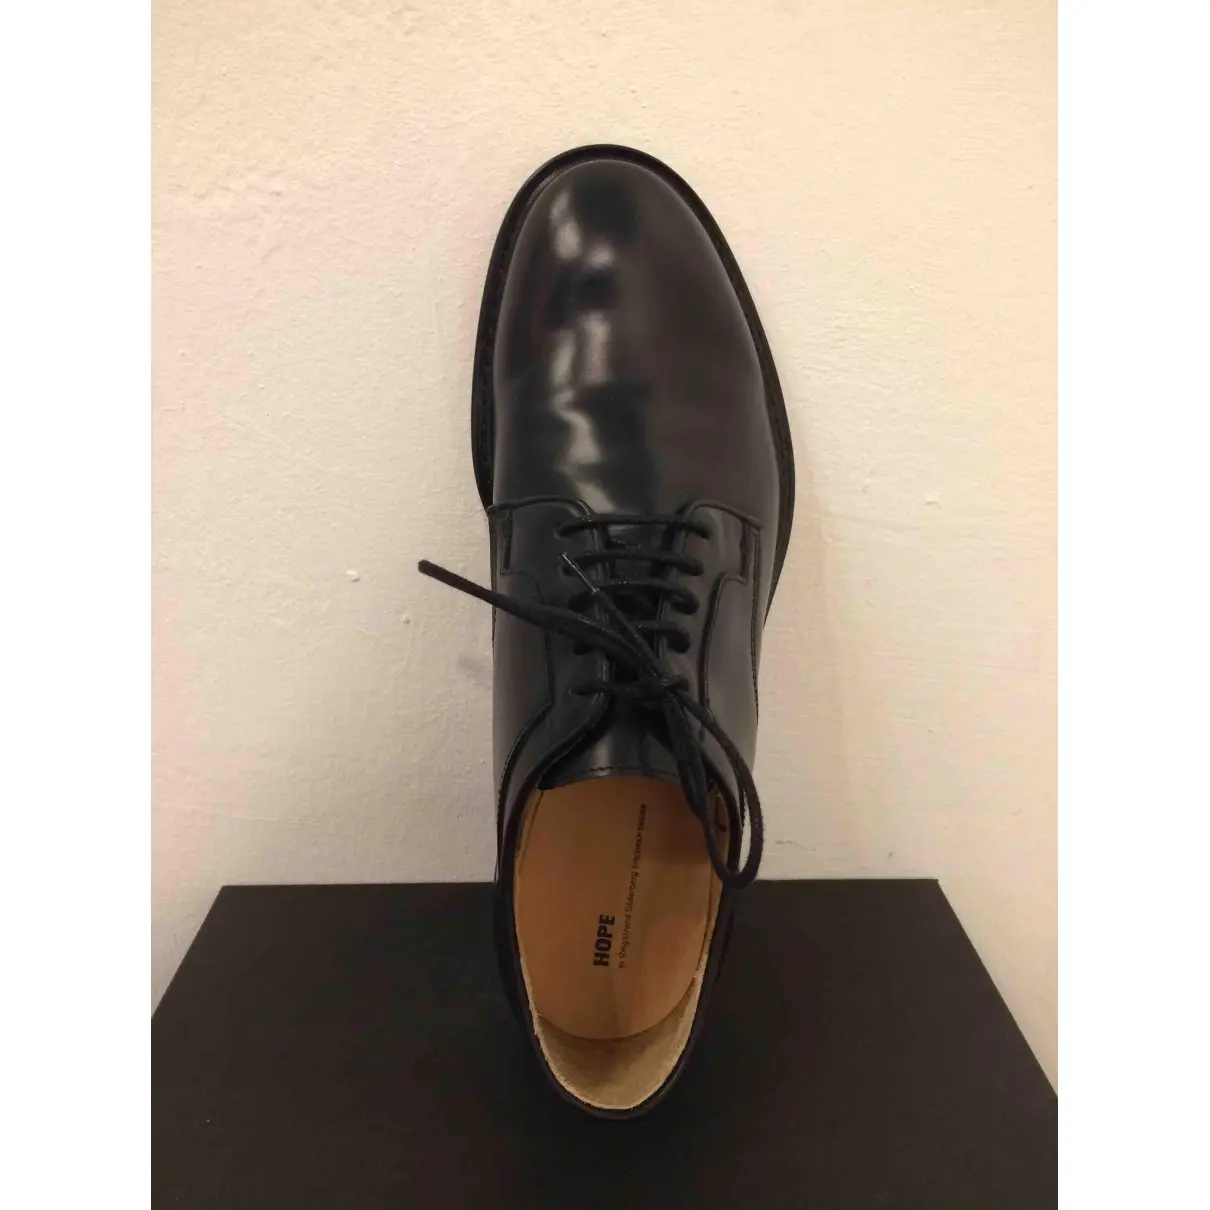 Buy Hope Leather lace ups online